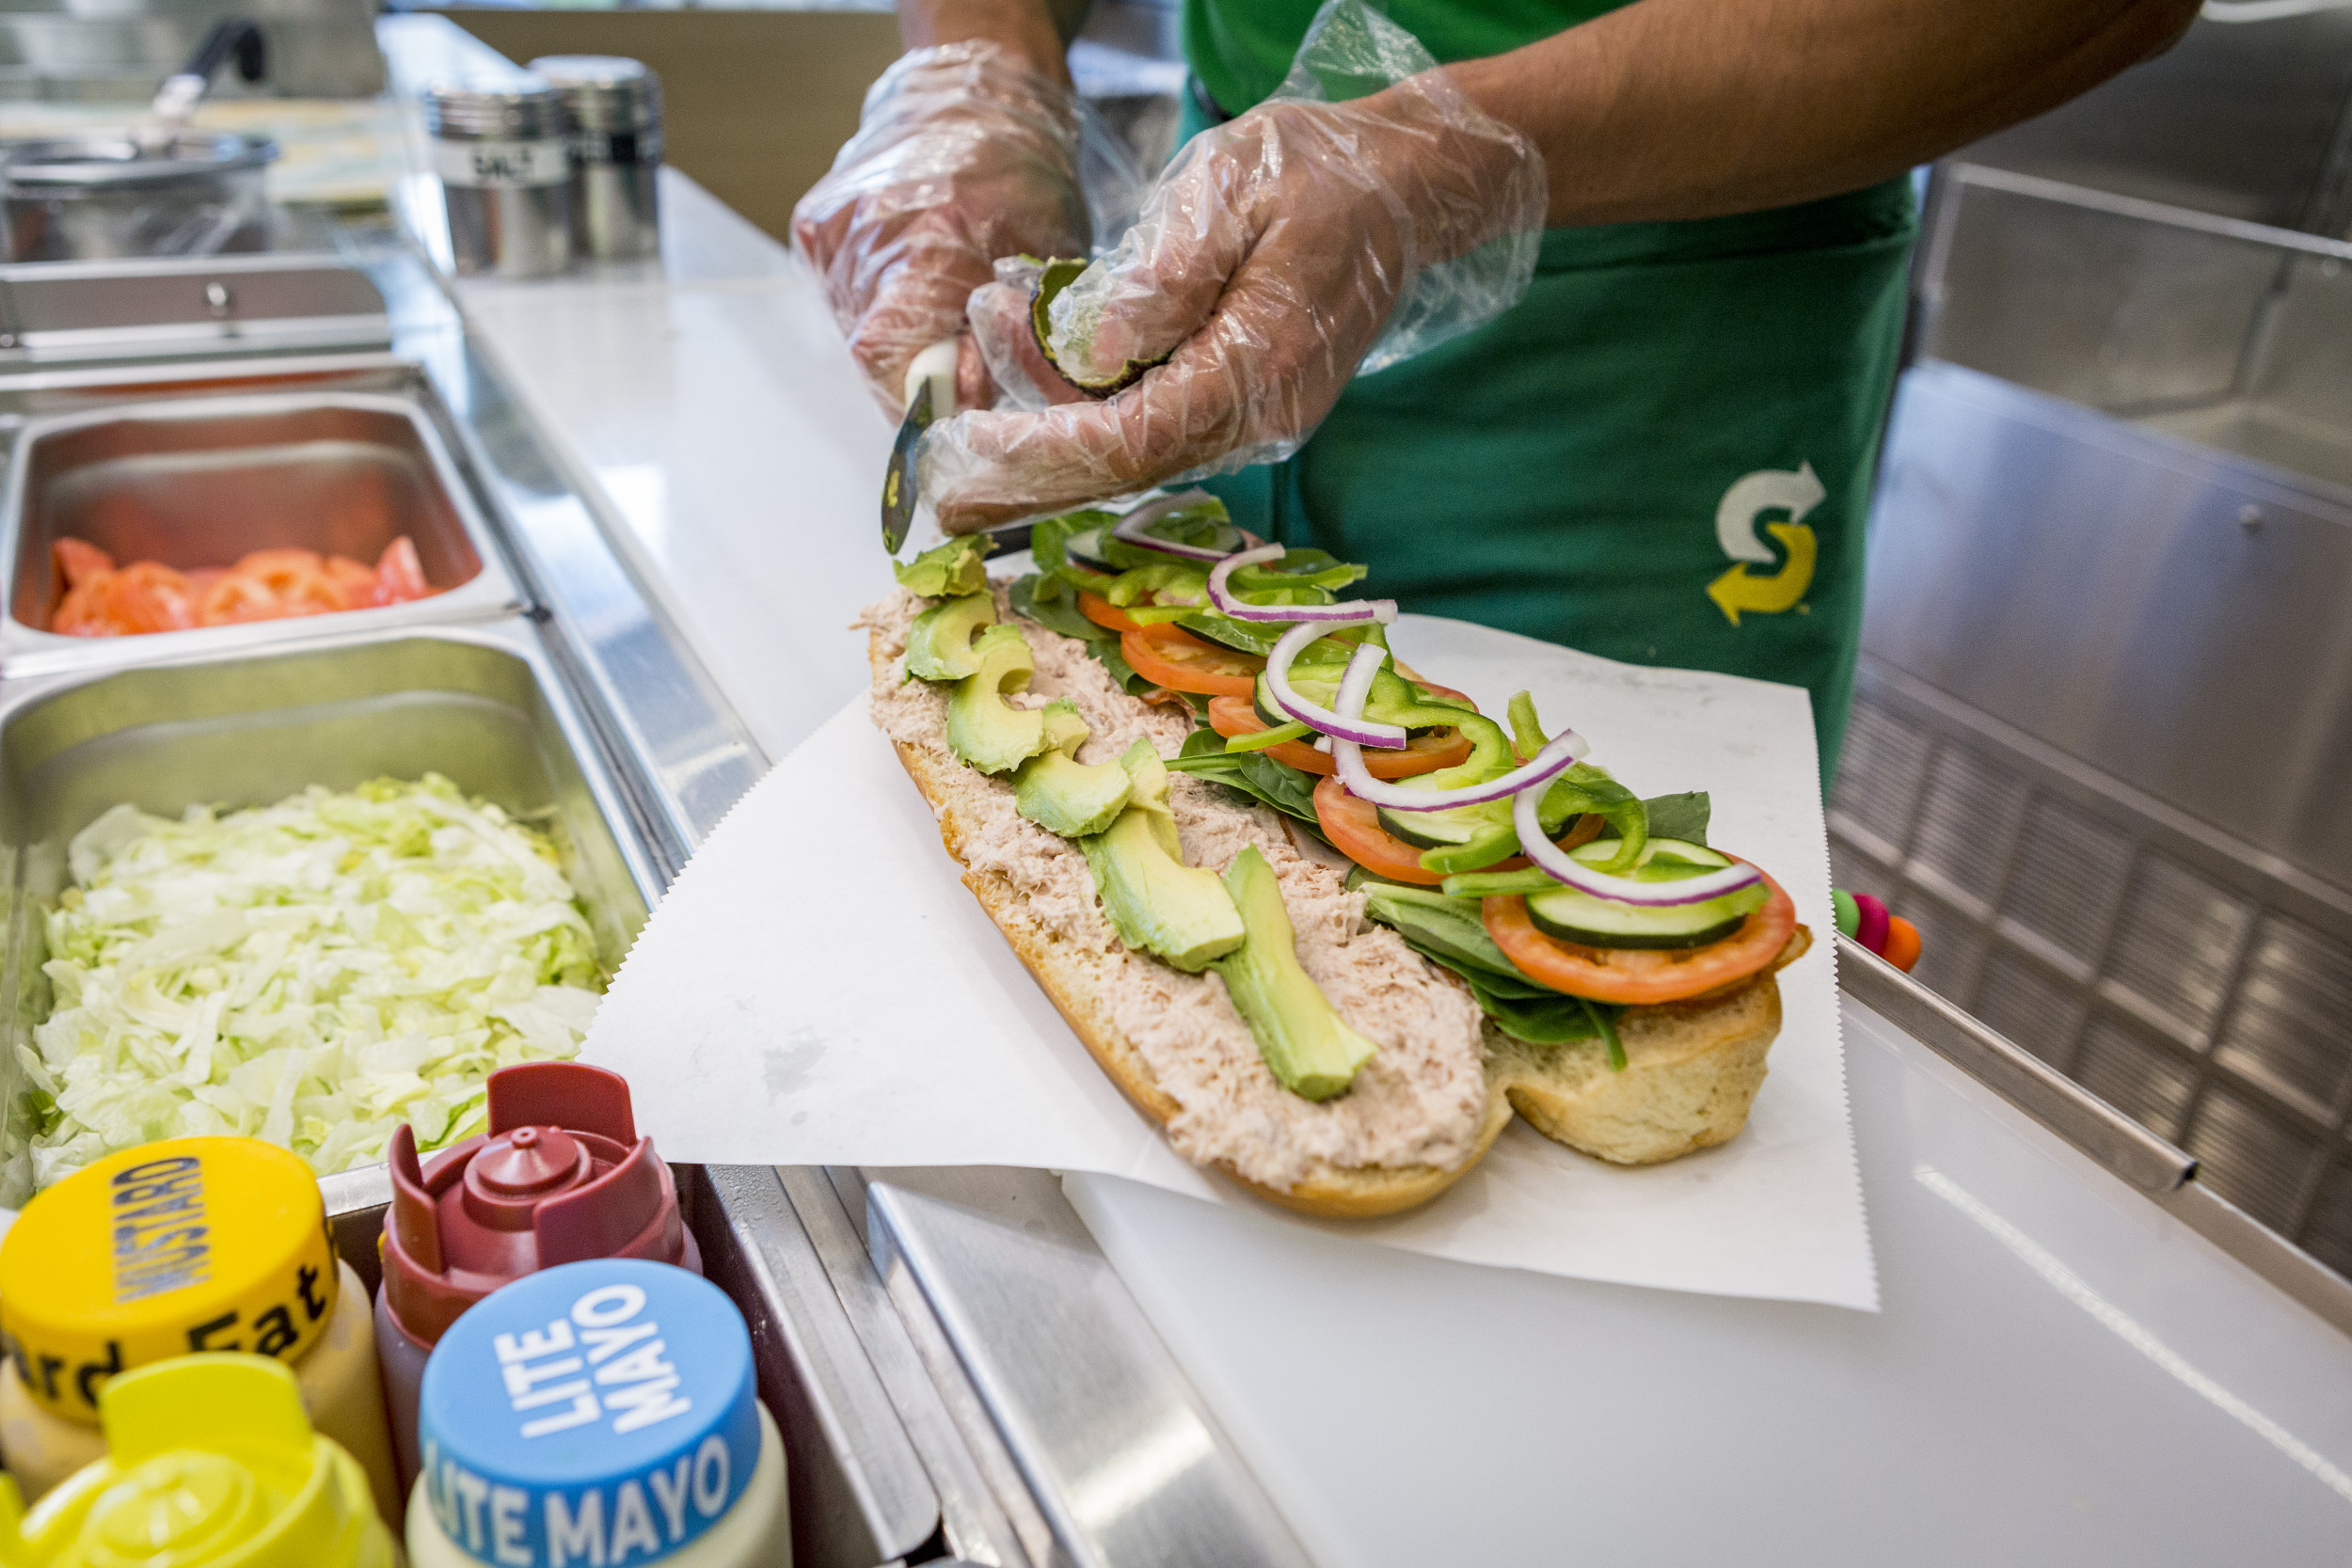 Subway Offers Free Subs For Life in Return For Foot Long Chest Tattoo   Funny Article